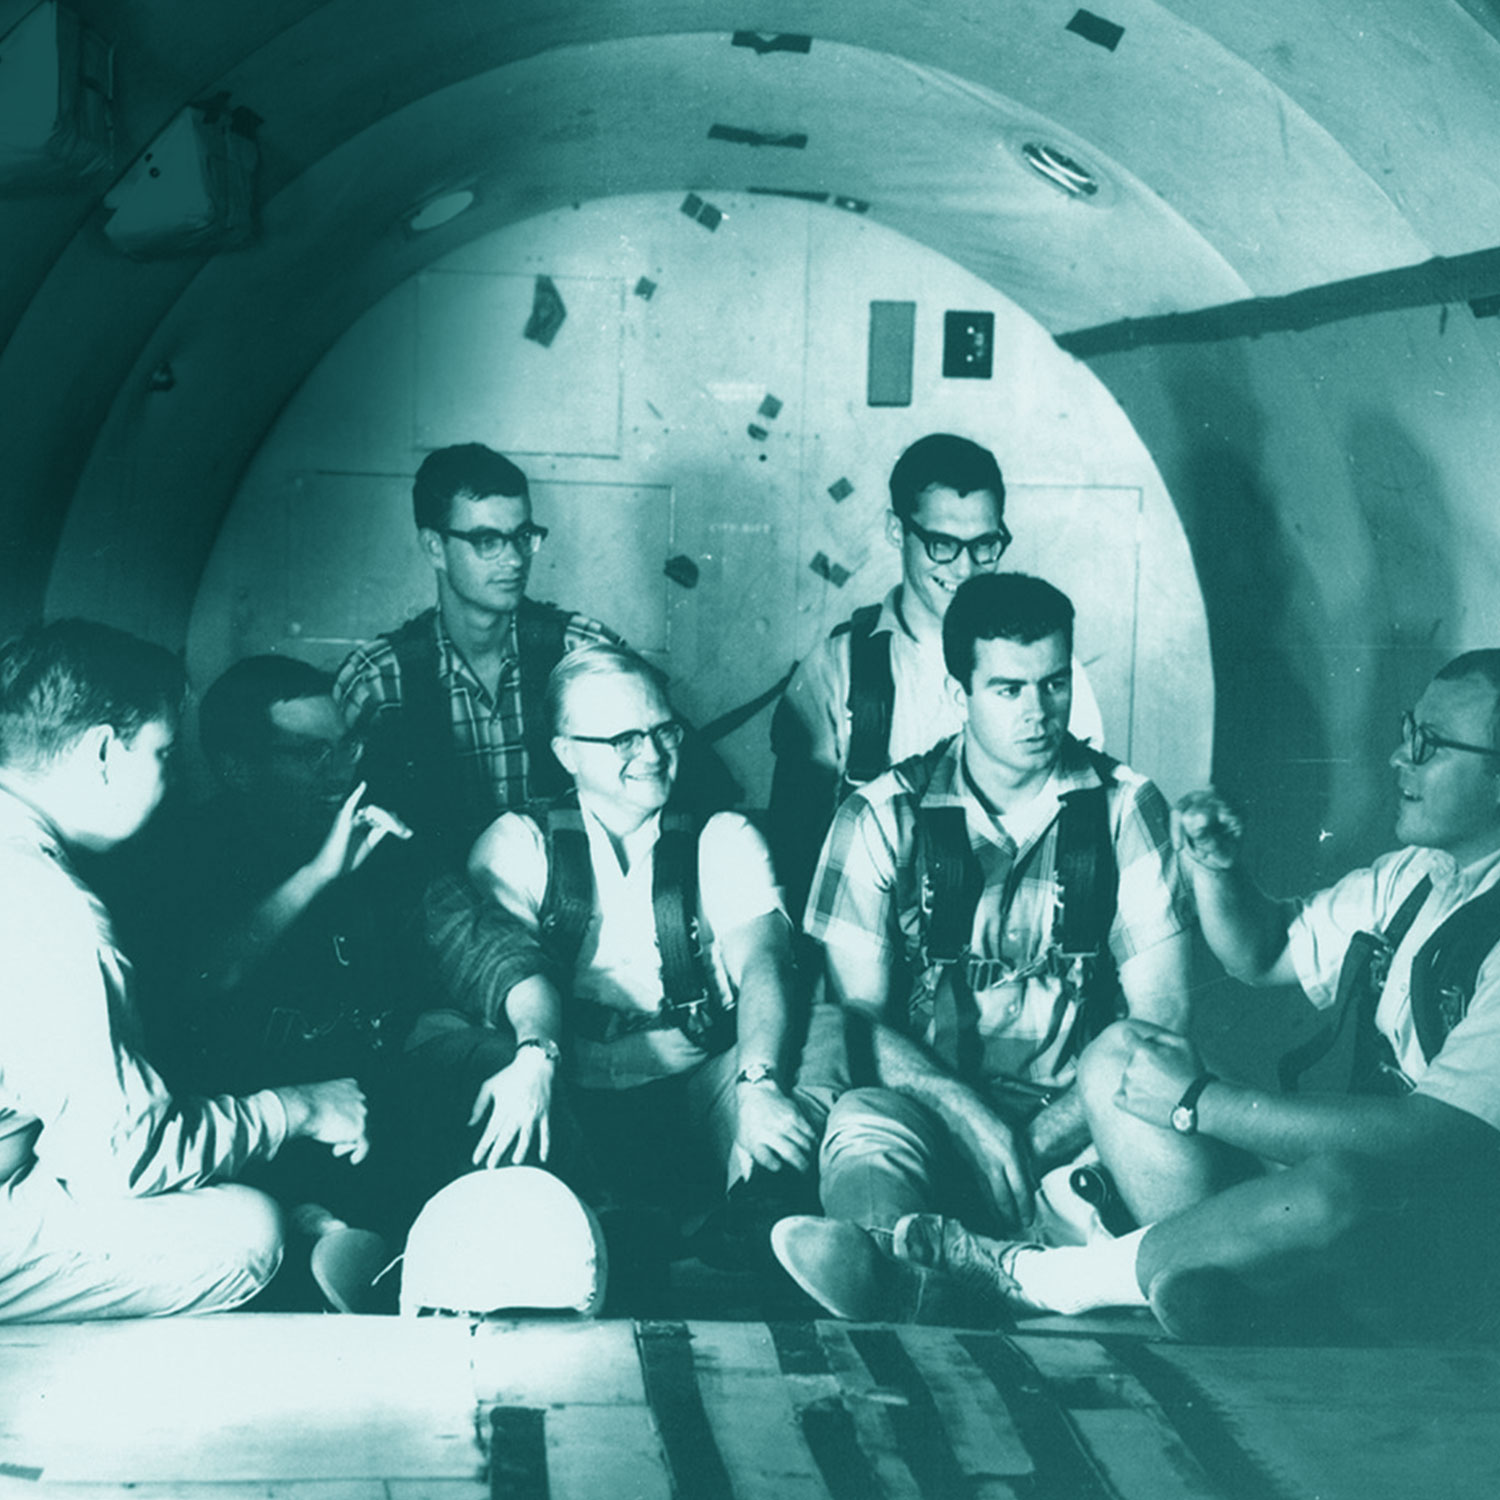 The deaf men who helped NASA send humans to space